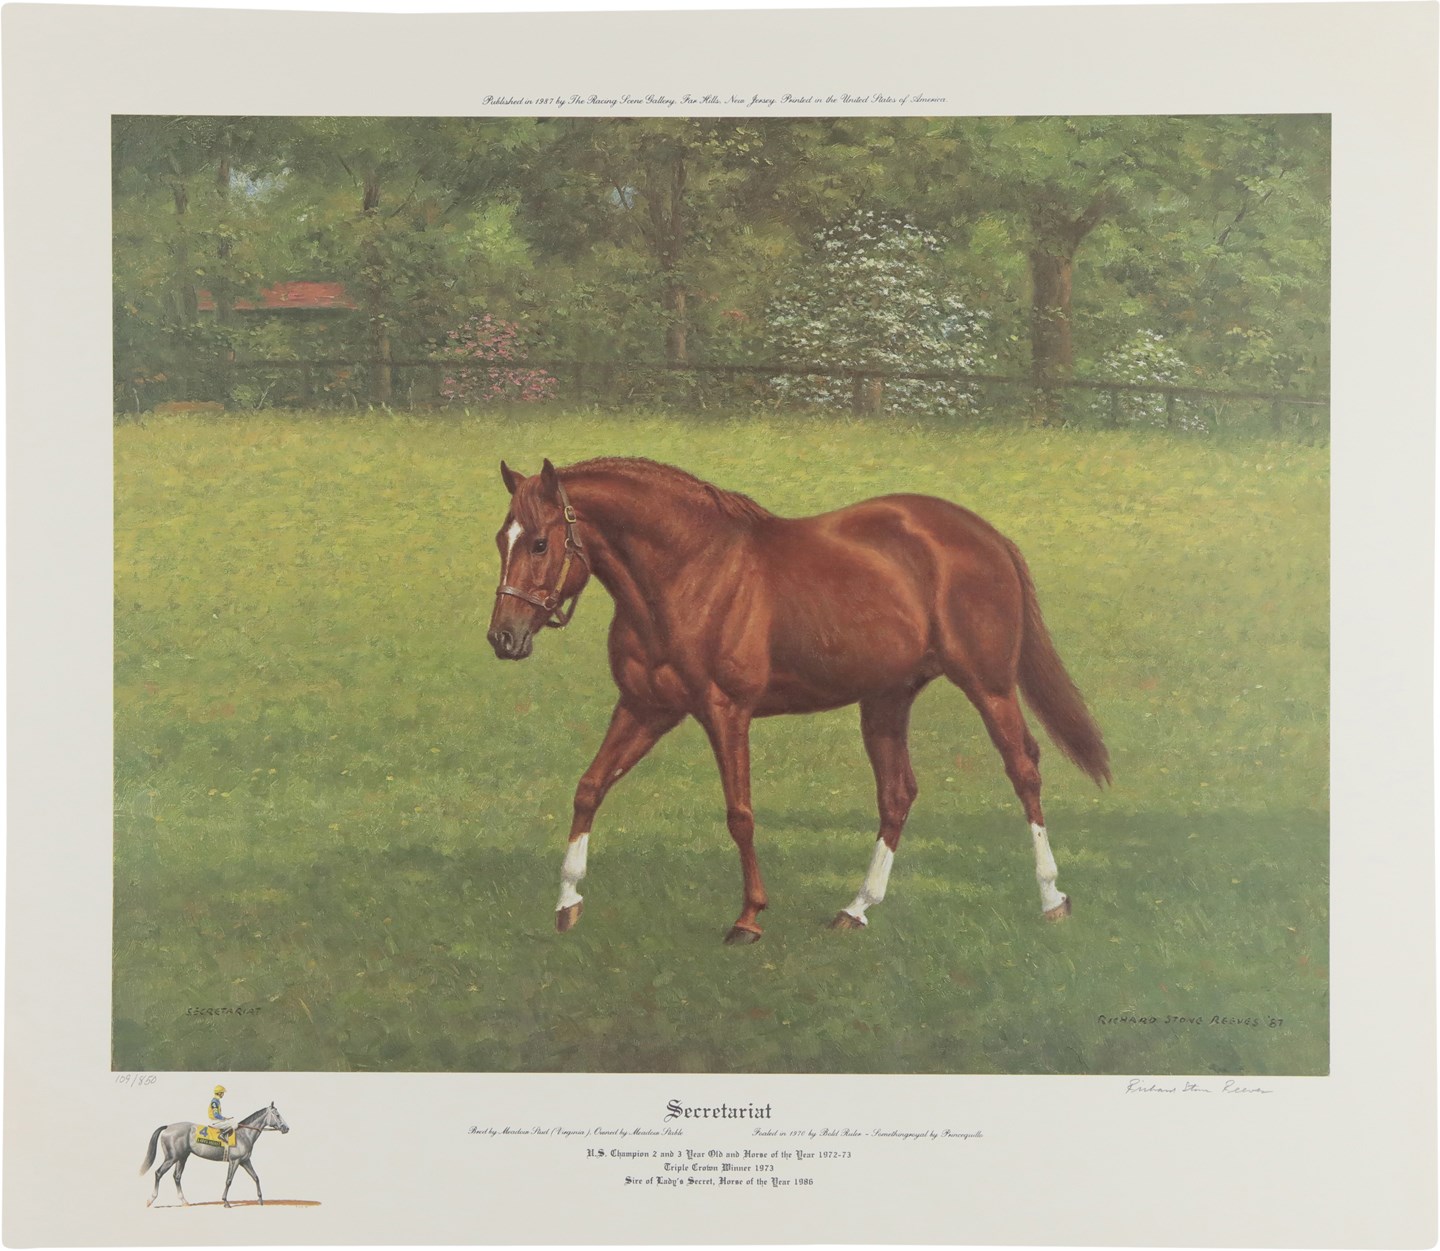 Horse Racing - 1987 Secretariat Limited-Edition Lithograph by Richard Stone Reeves #109/850